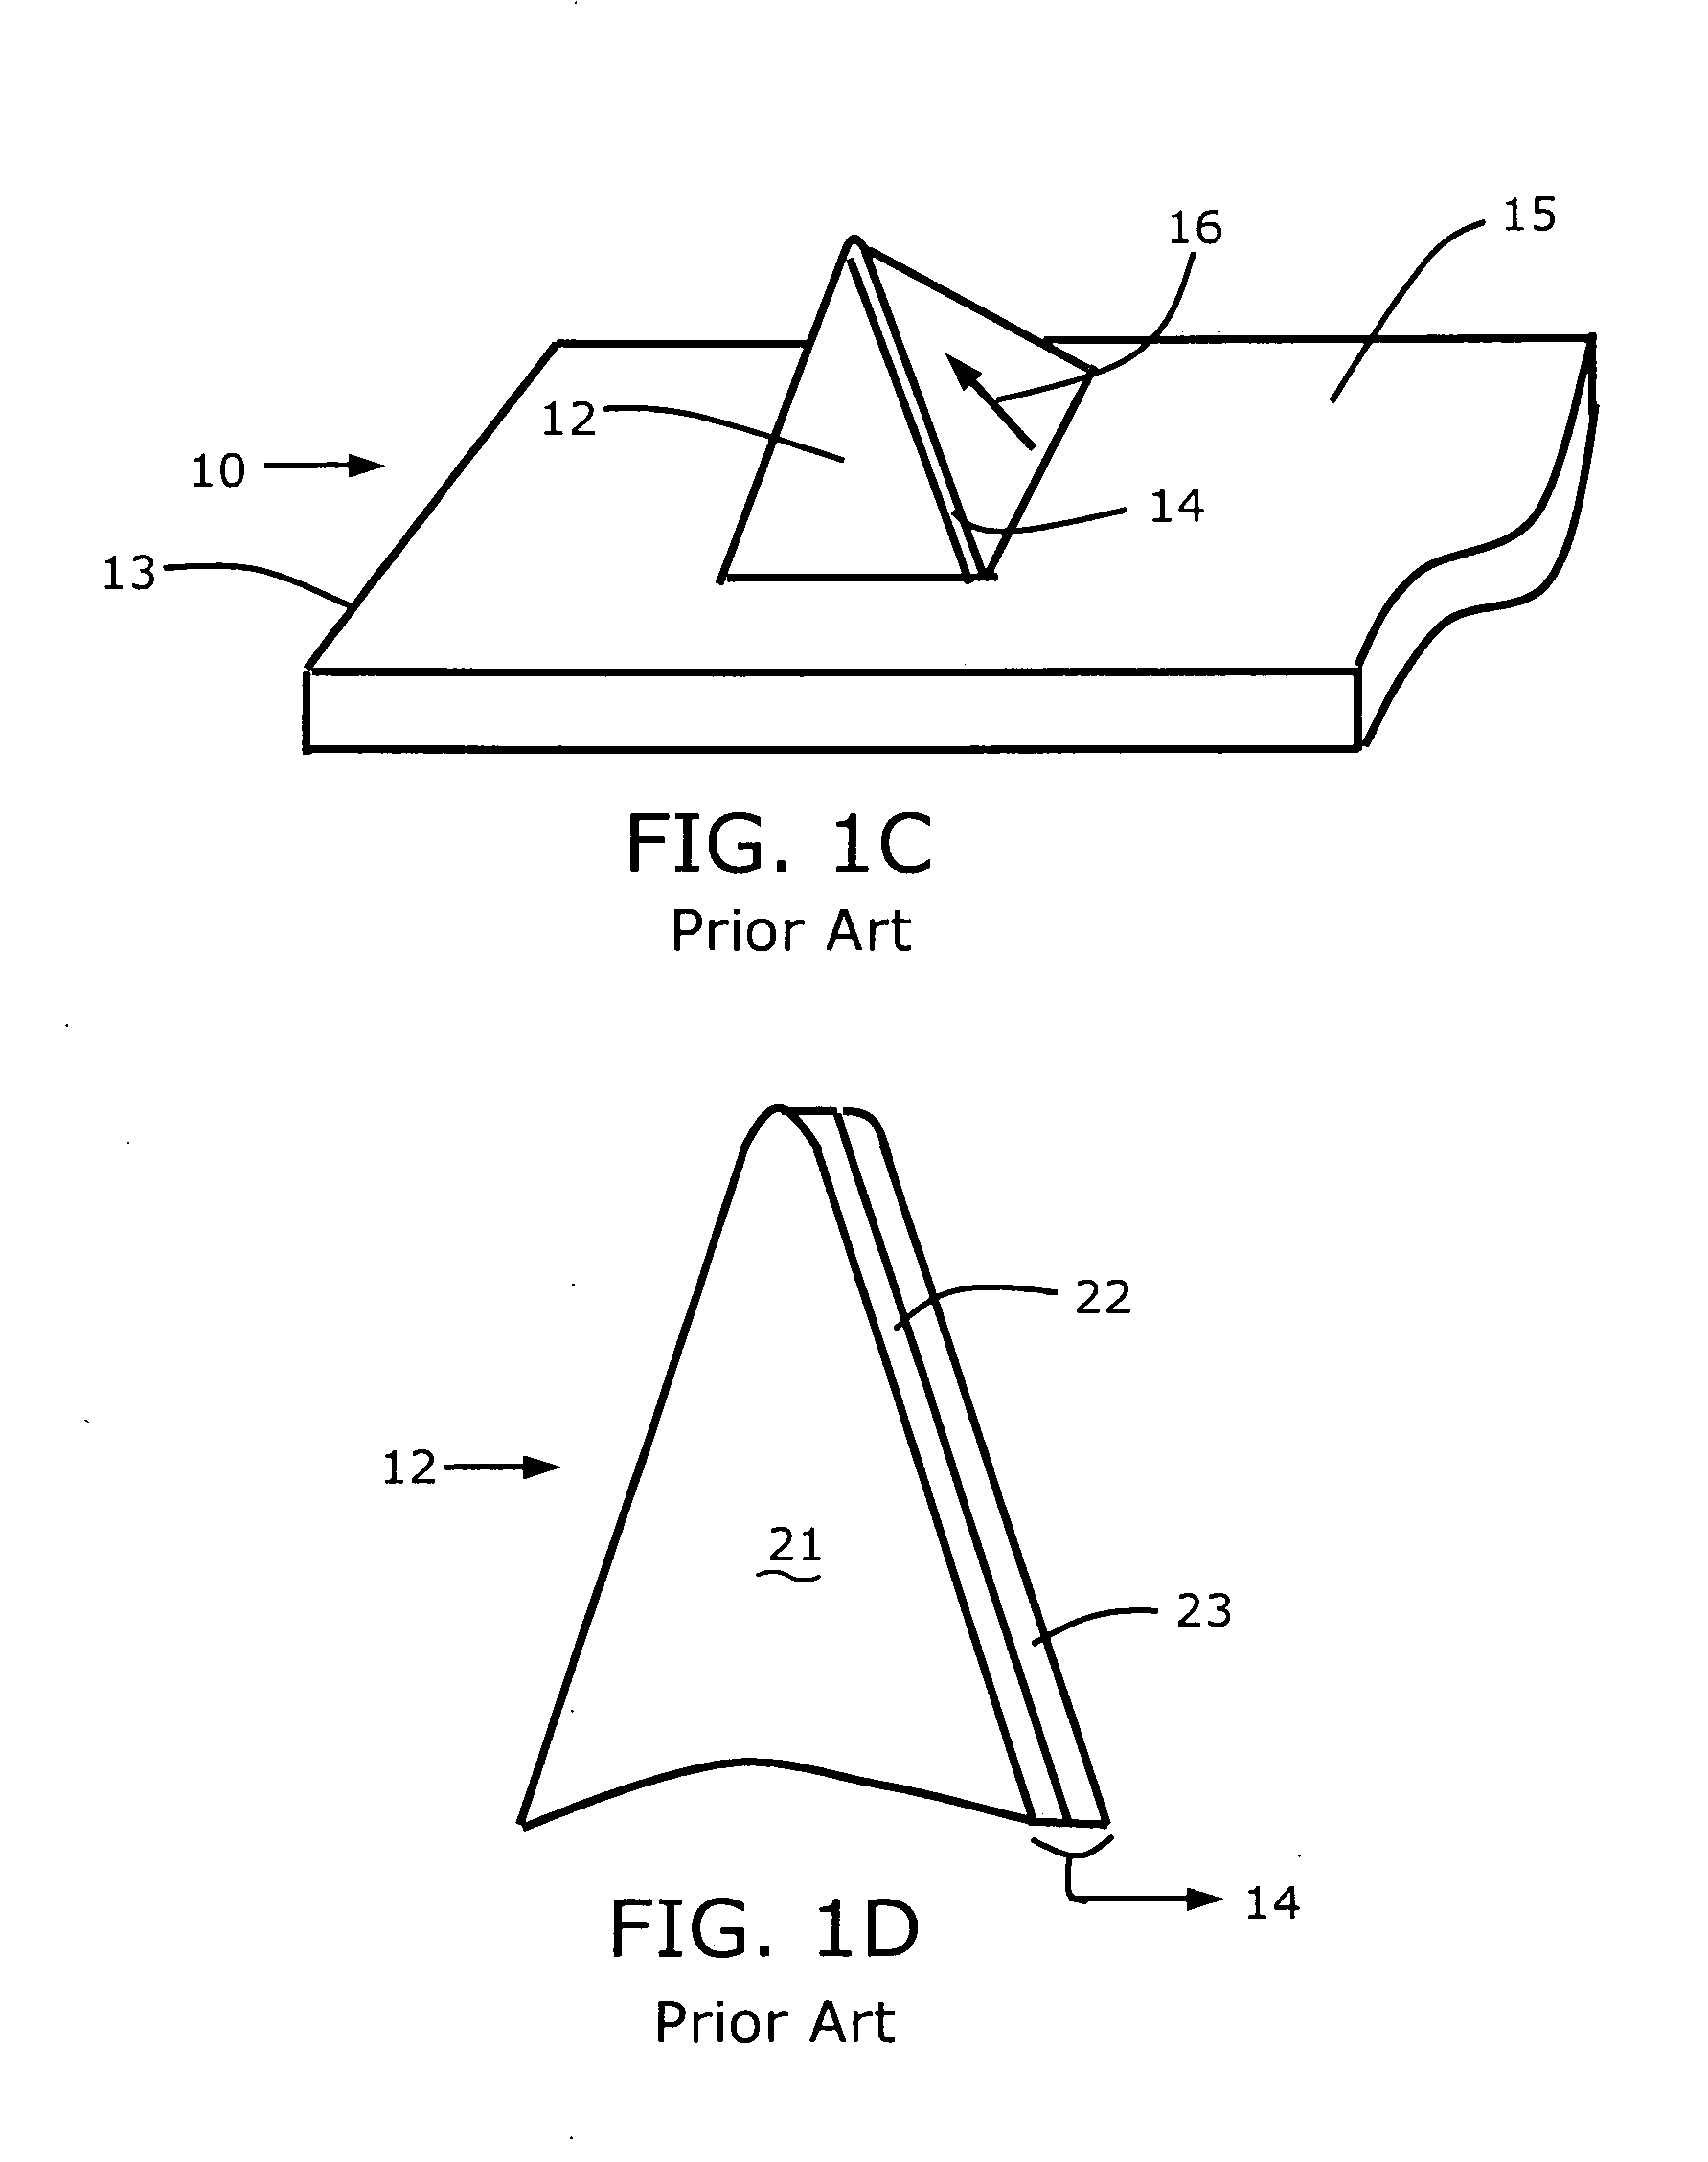 Magneto-optical device with an optically induced magnetization